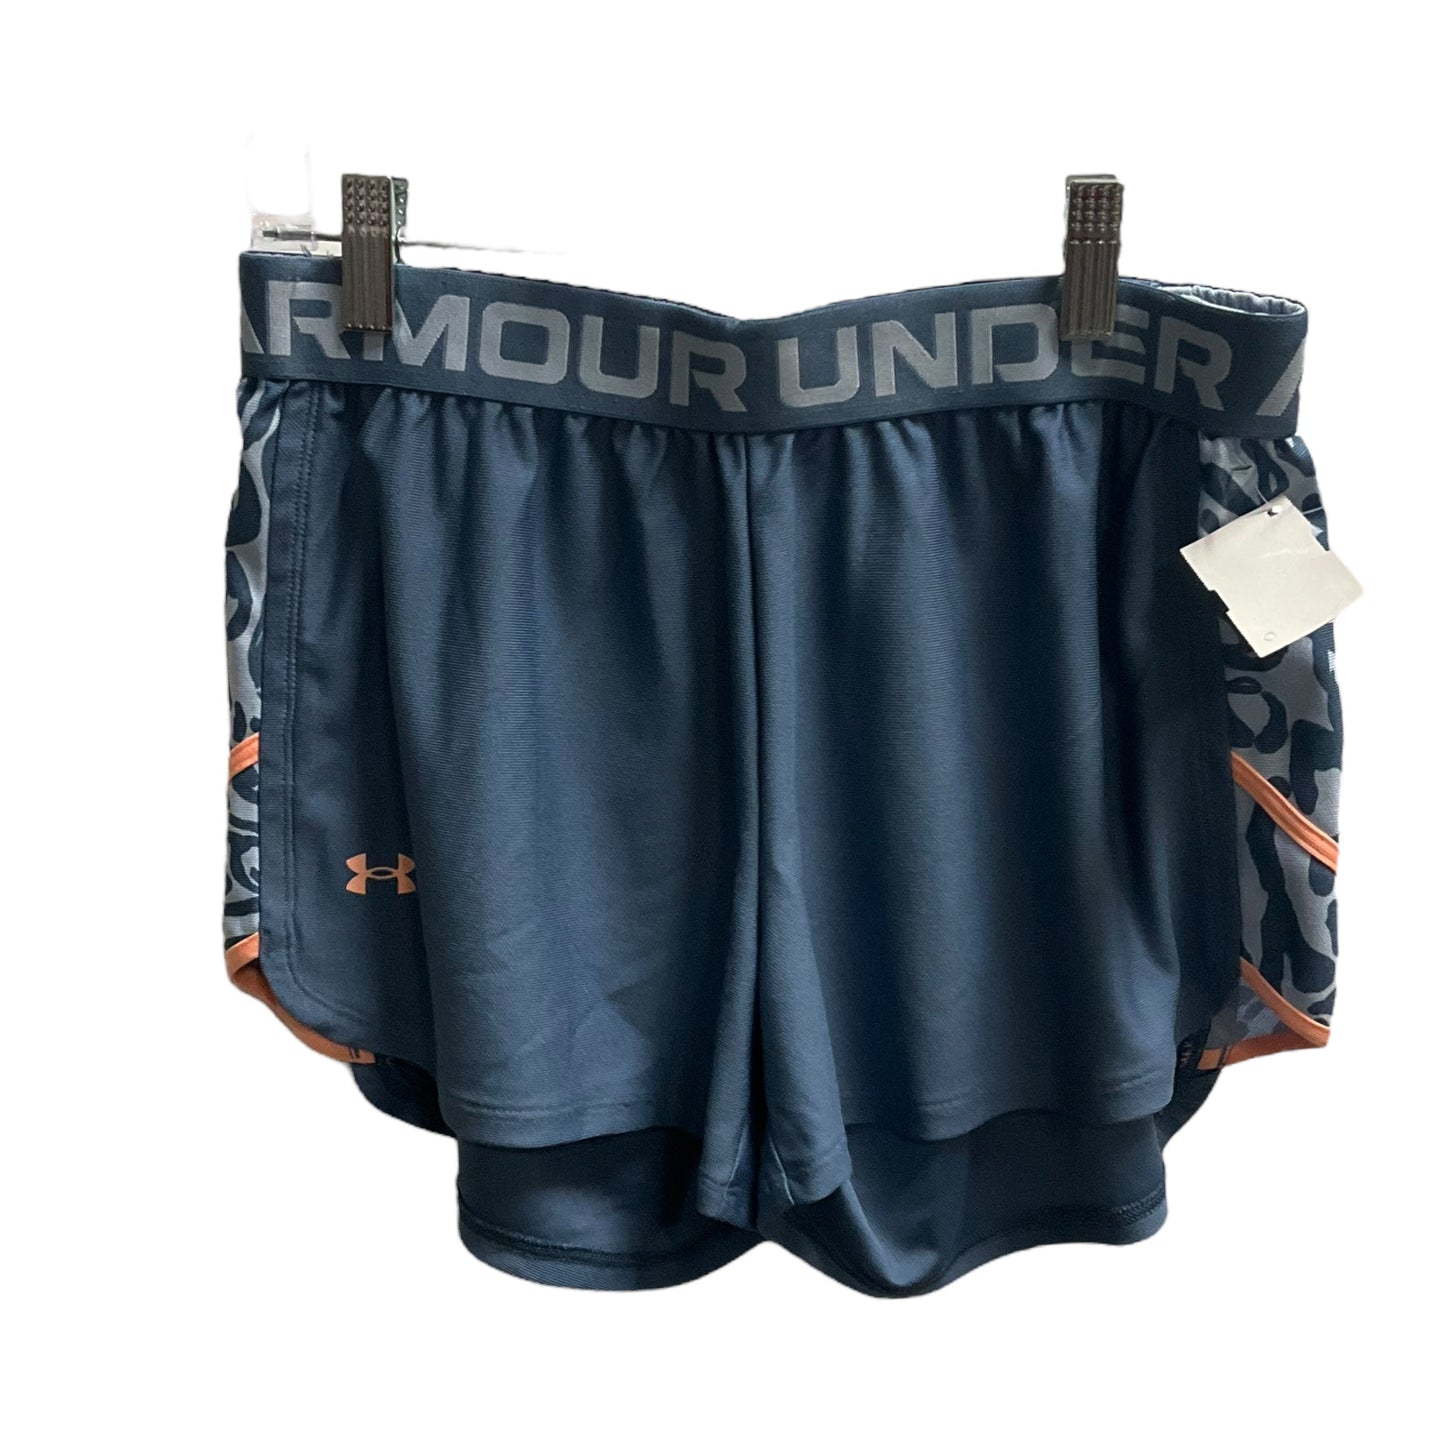 Blue Athletic Shorts Under Armour, Size S